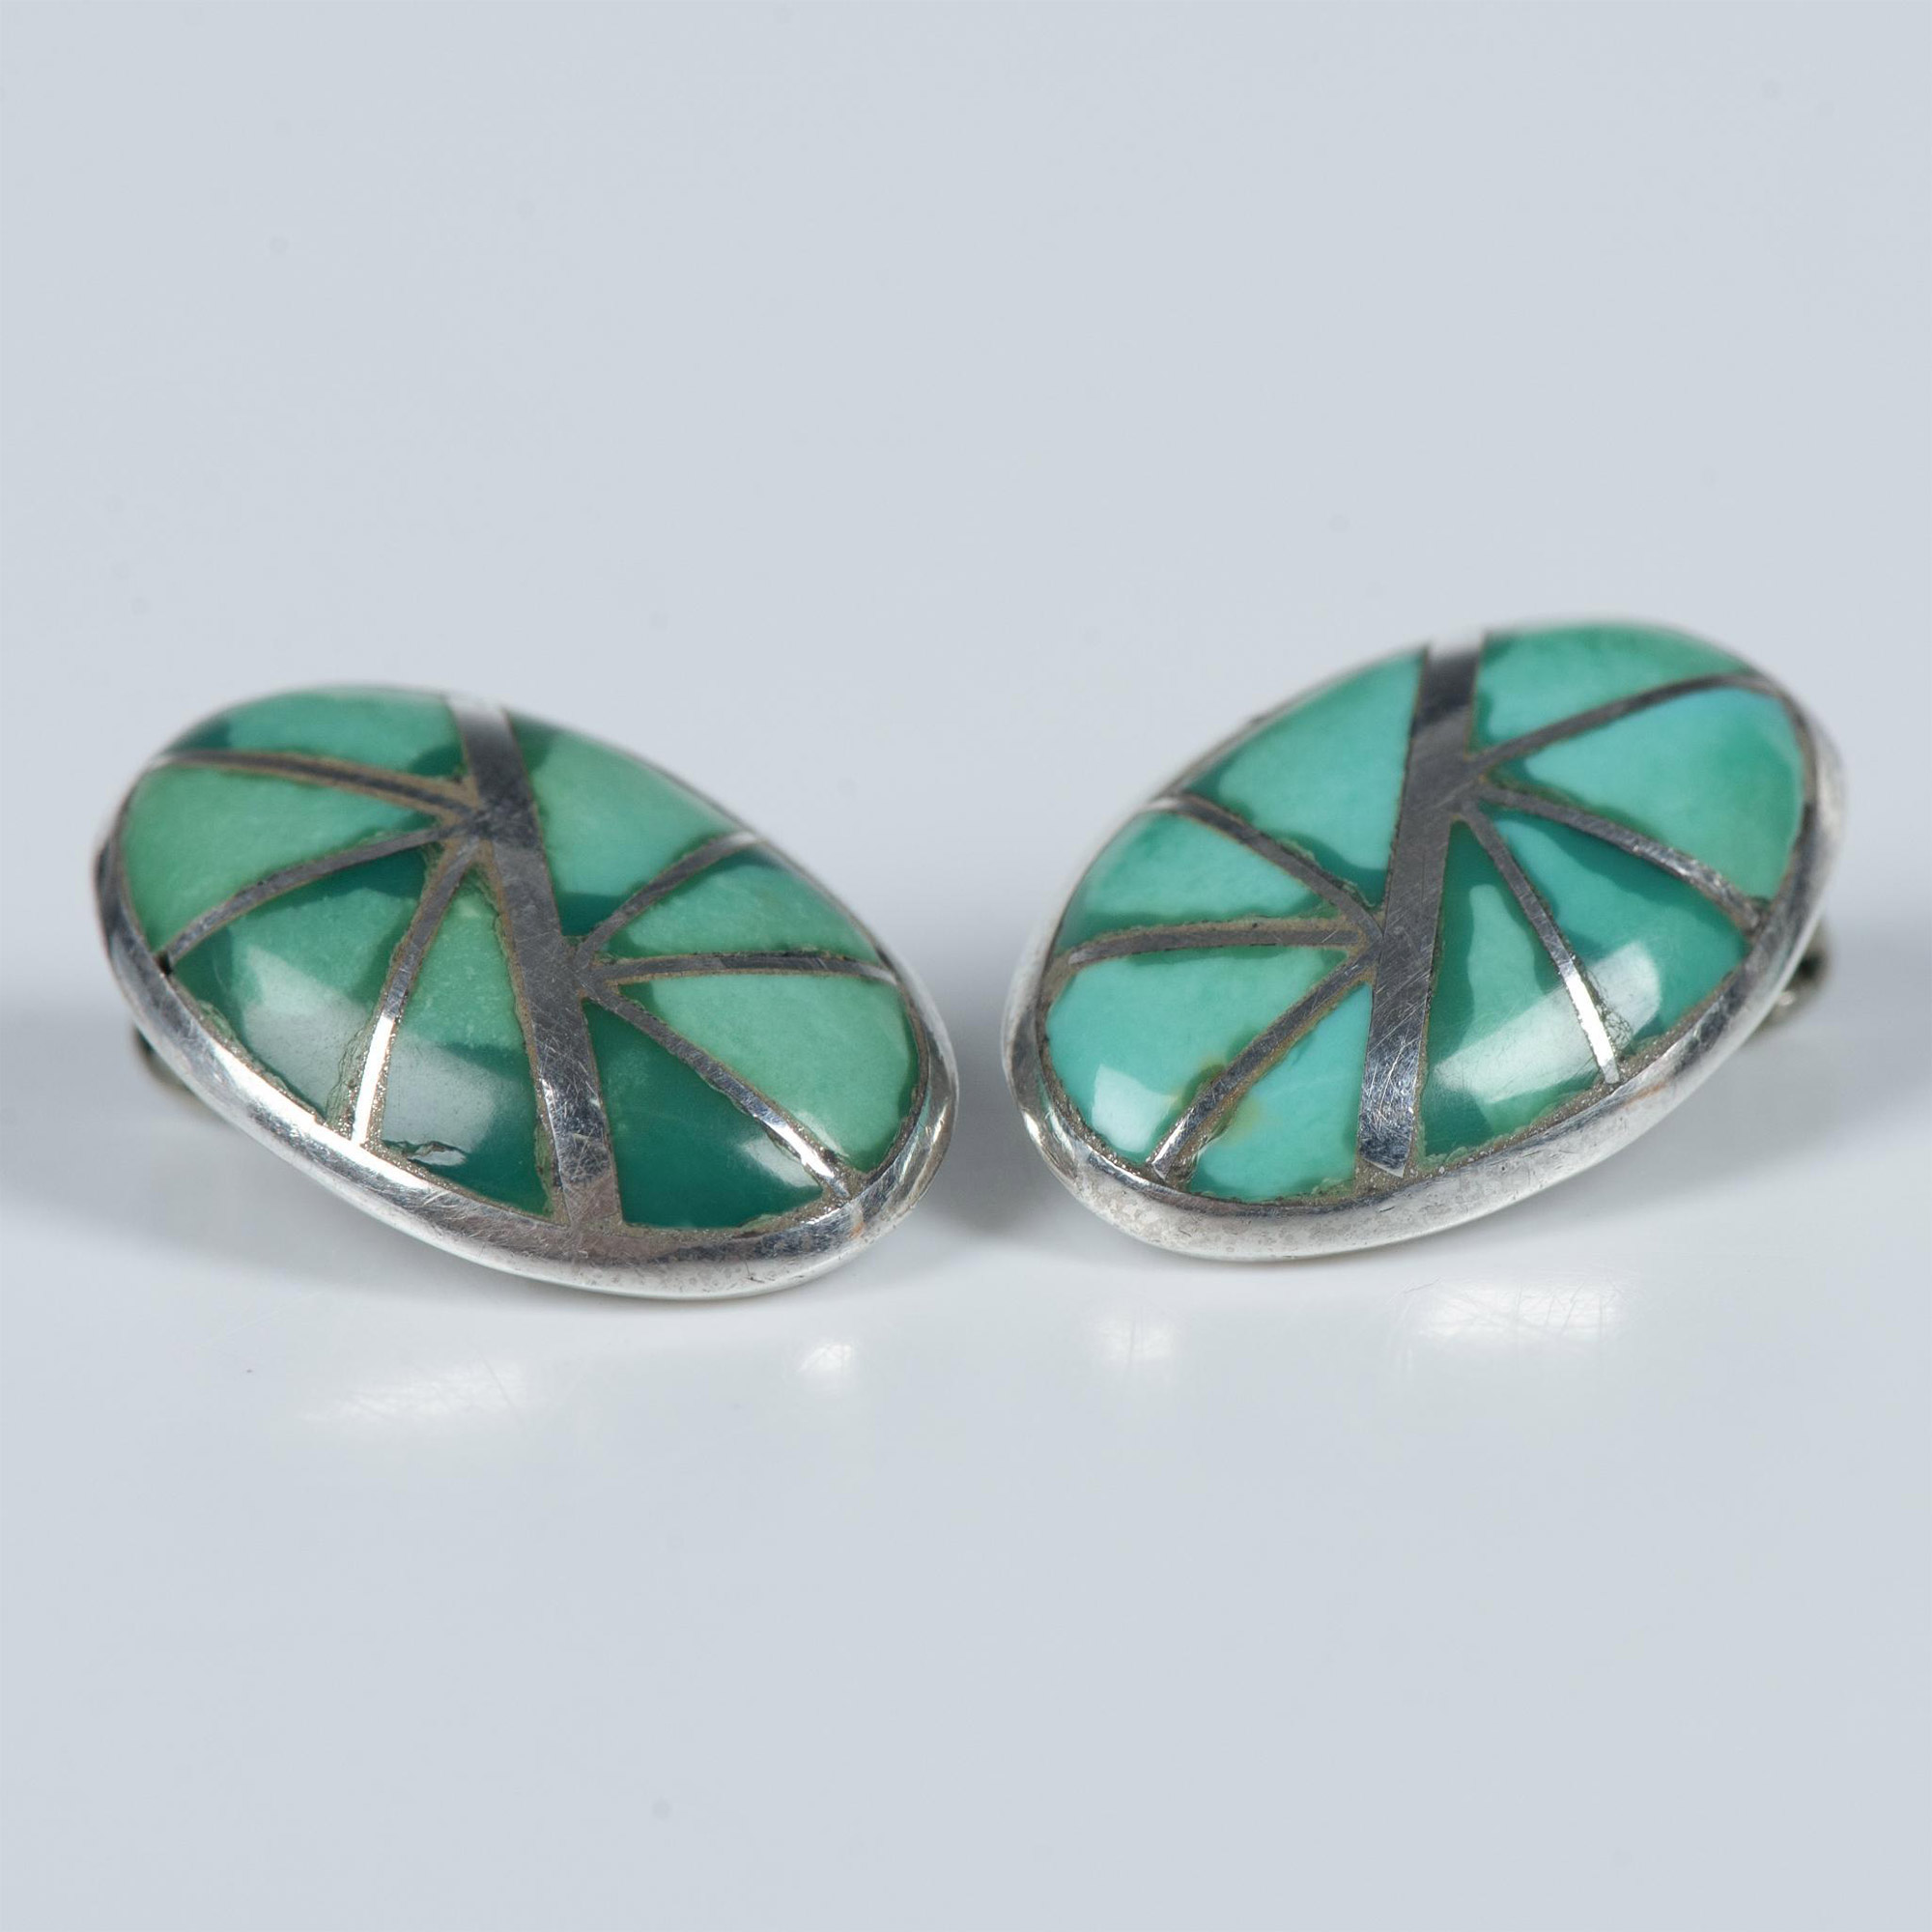 K.E.K. Zuni Sterling & Turquoise Inlay Clip-On Earrings - Image 4 of 4